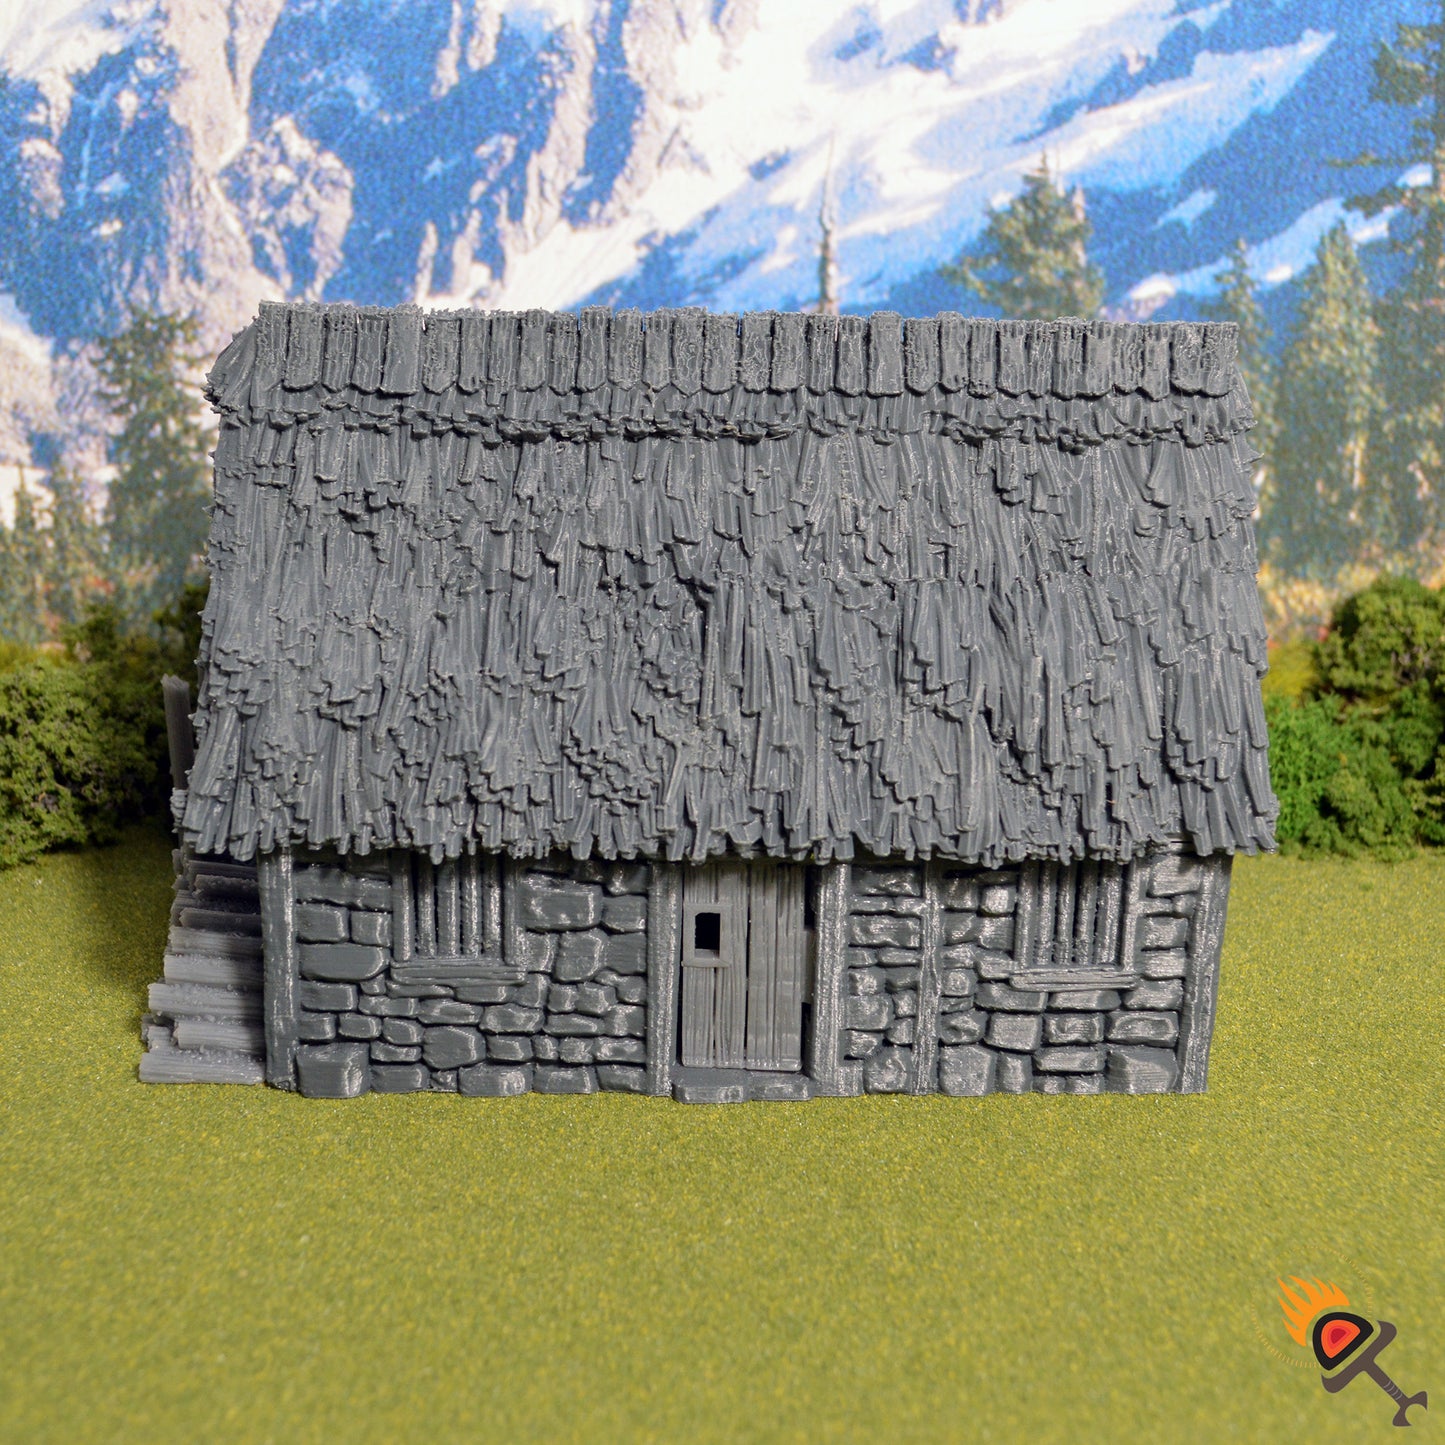 Norman Stone Barn 15mm 28mm 32mm for D&D Terrain, DnD Pathfinder Medieval Village, Miniature Stone Barn, Printable Scenery